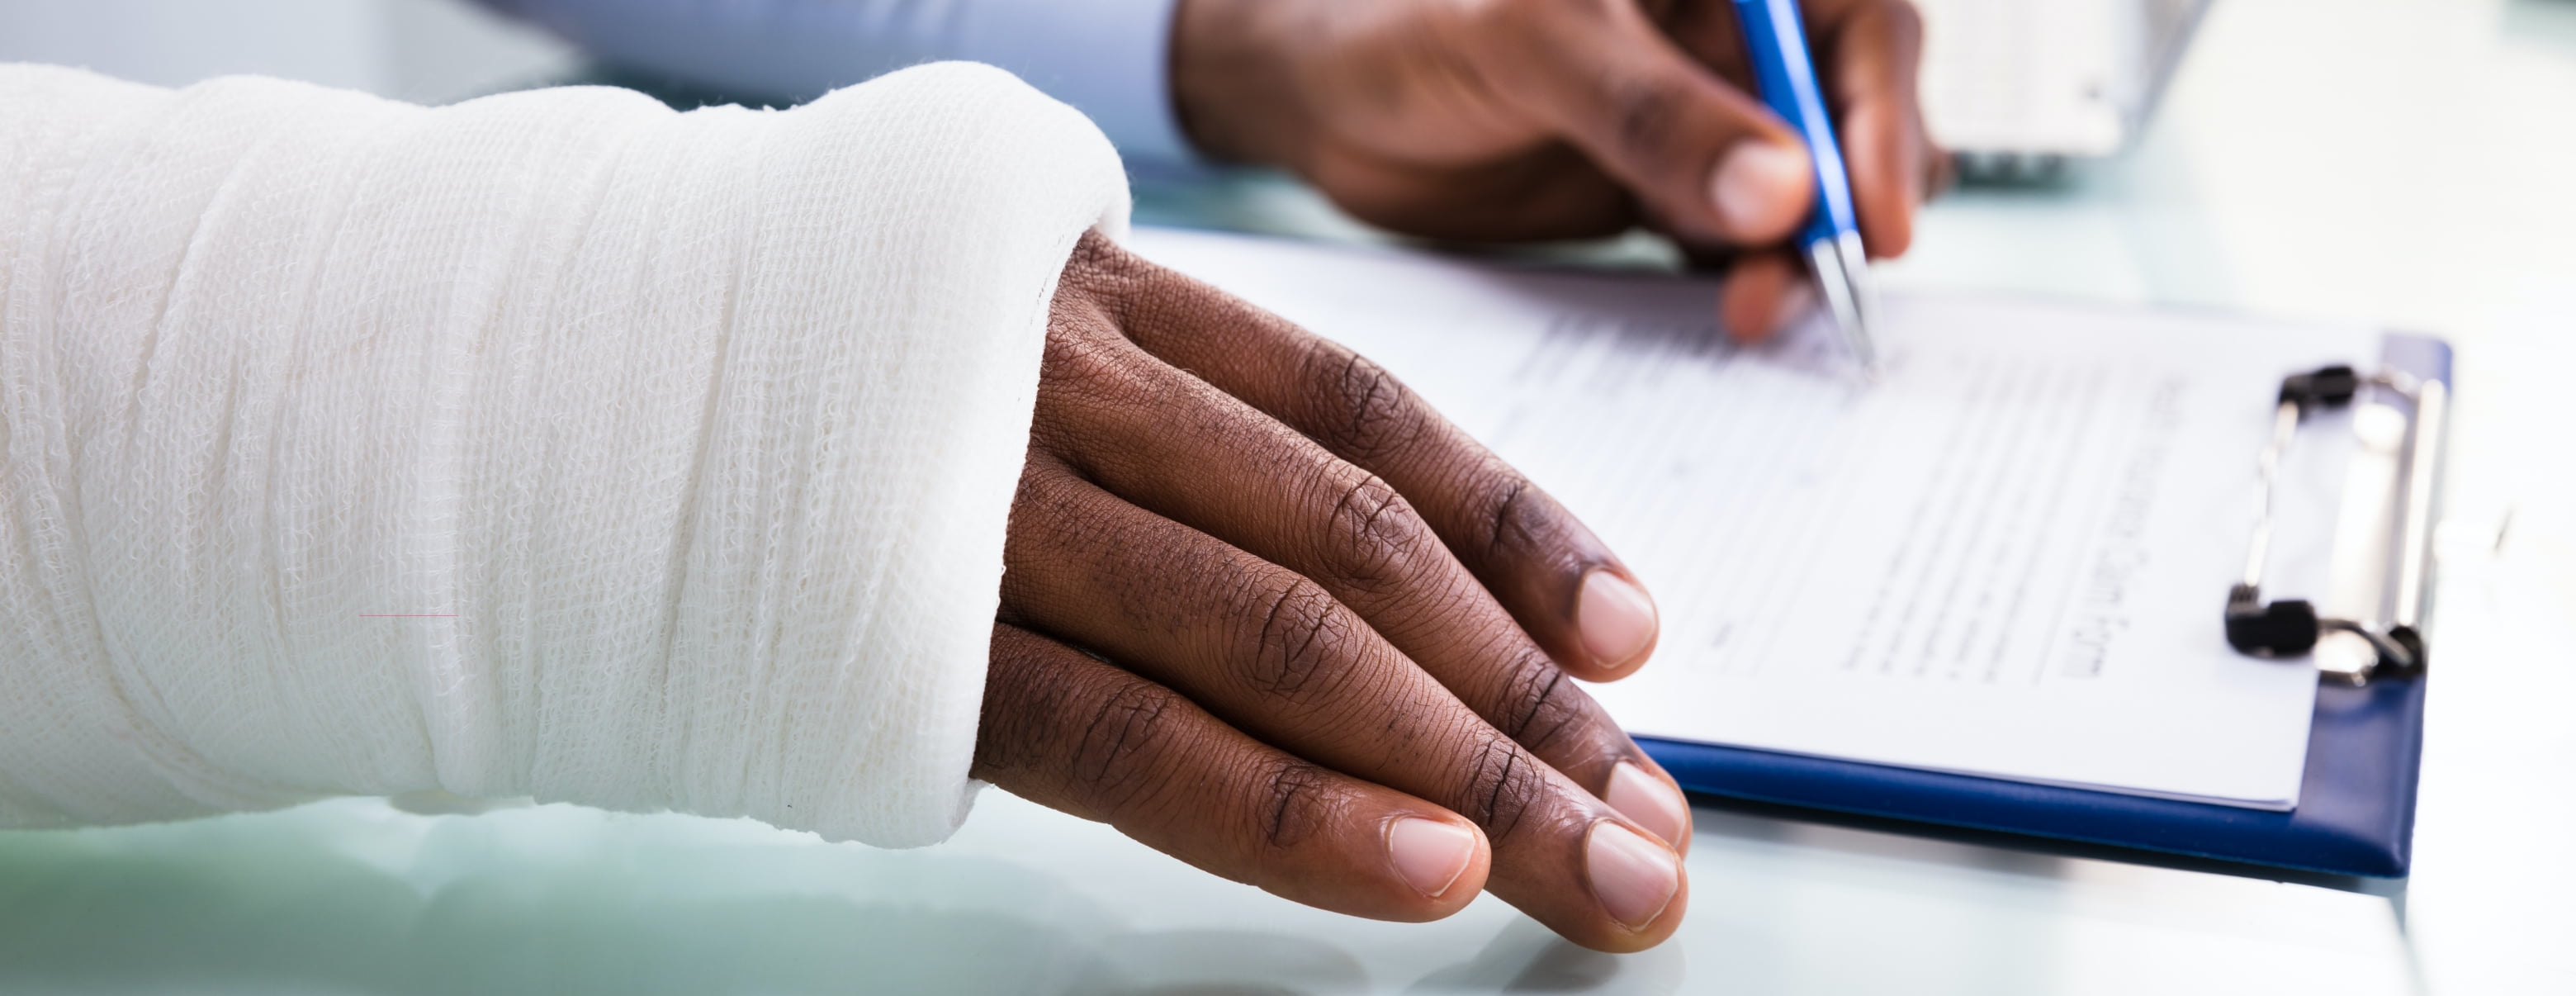 Hand injured in workers' compensation claim in Utah